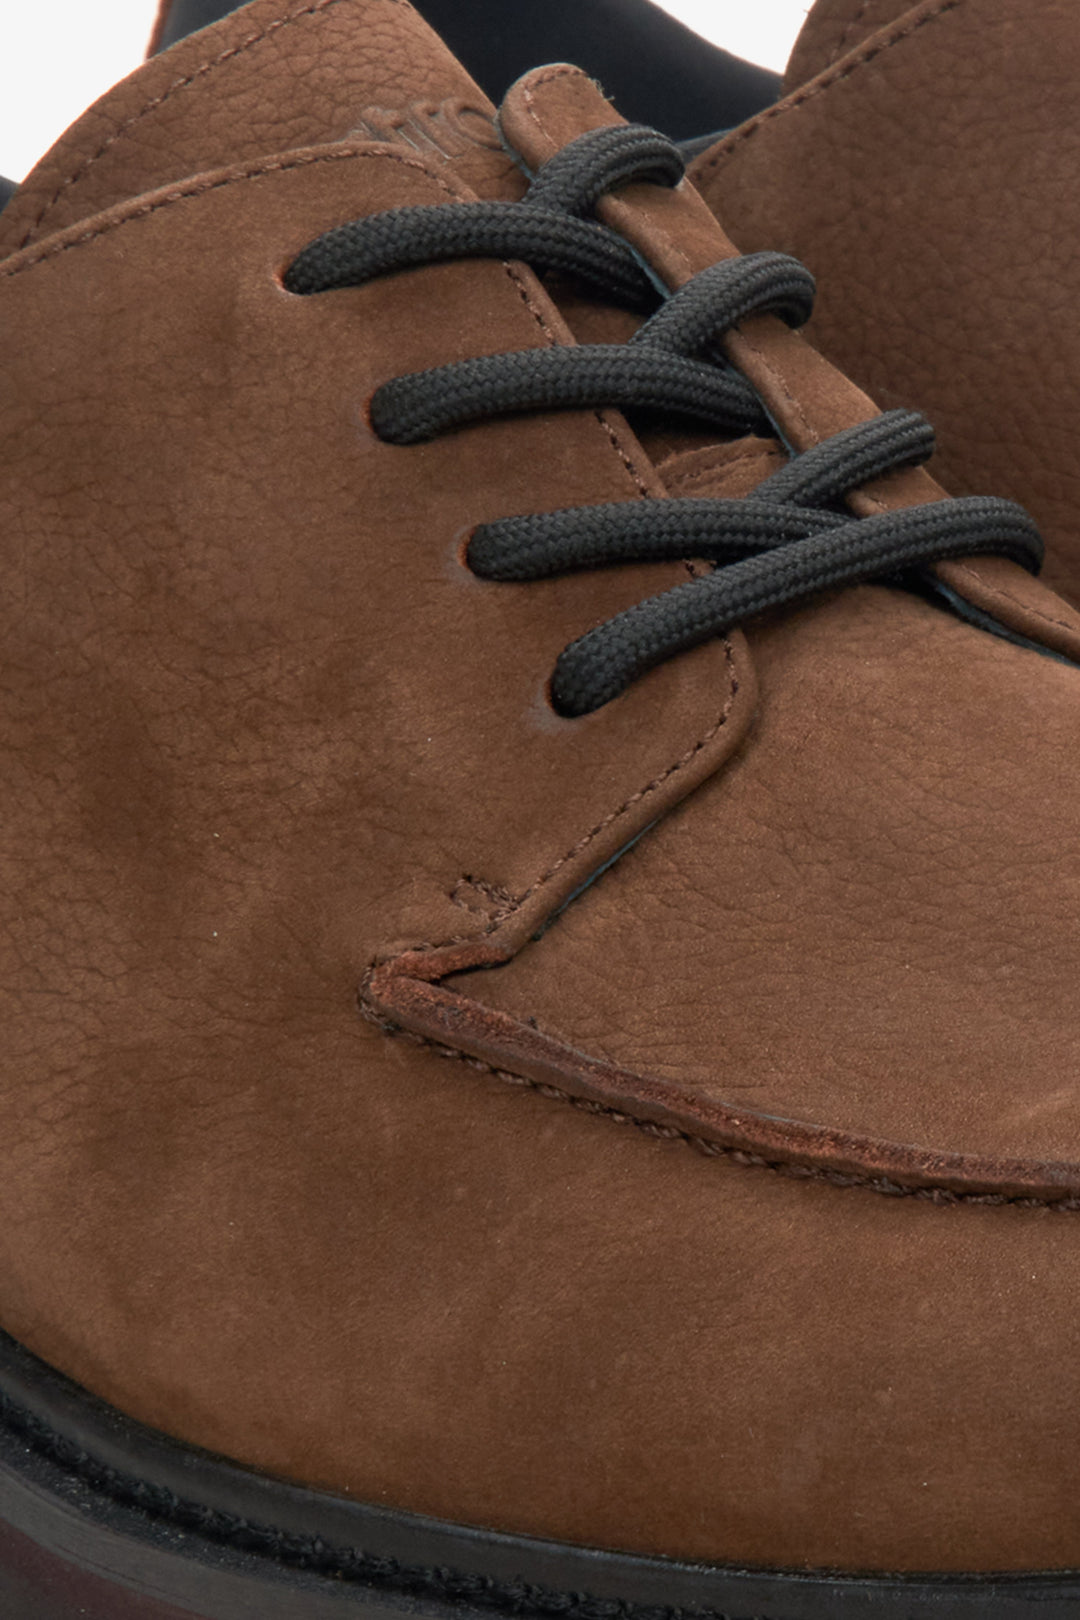 Men's dark brown nubuck loafers by Estro - close-up on the details.